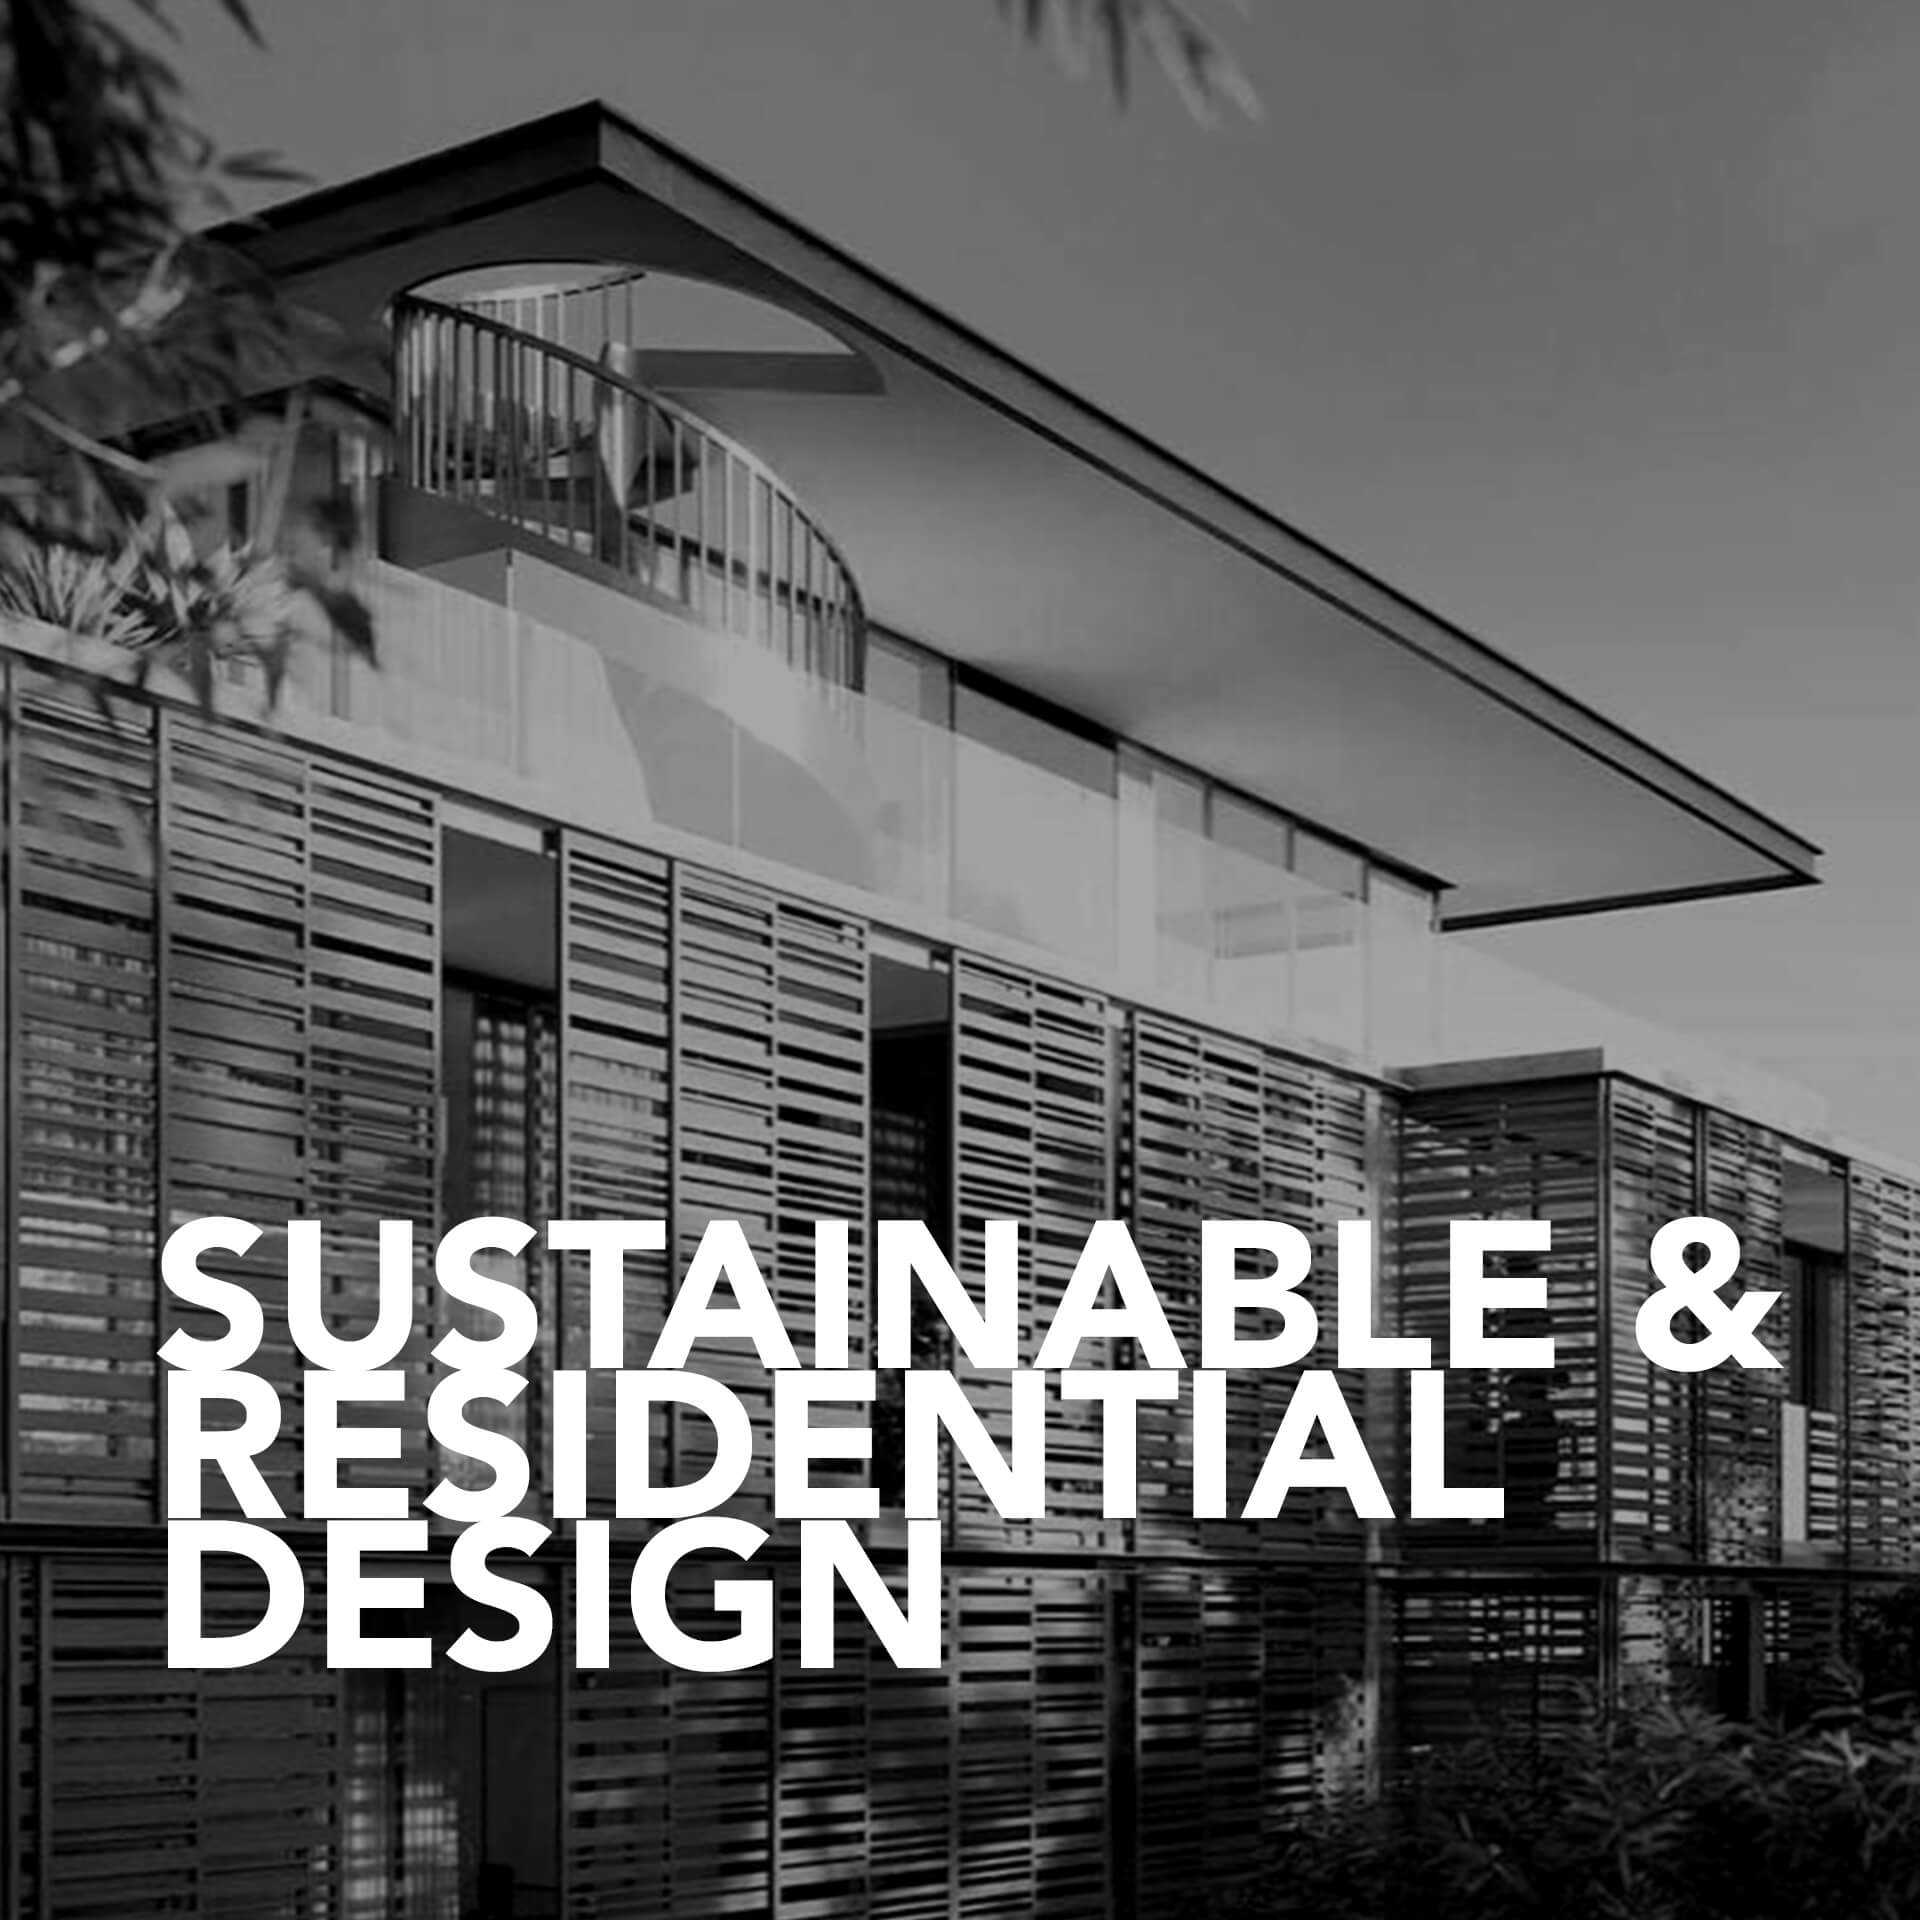 SUSTAINABLE & RESIDENTIAL DESIGN